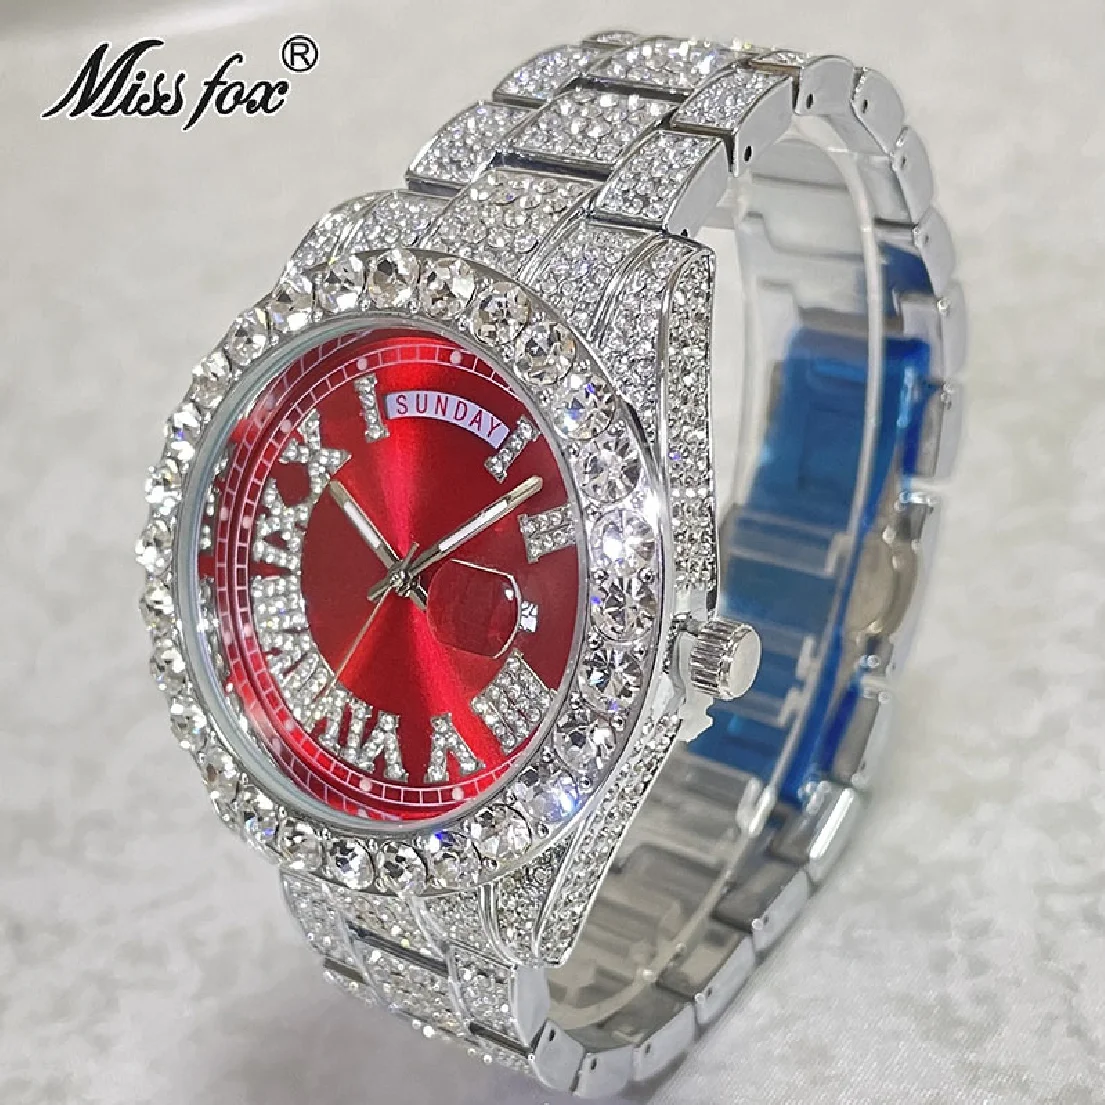 

Hip Hop Brand New Luxury Moissanite Watch For Men Fashion Red Waterproof Wrist Watches Automatic Date Week Clocks Male Gift Hot